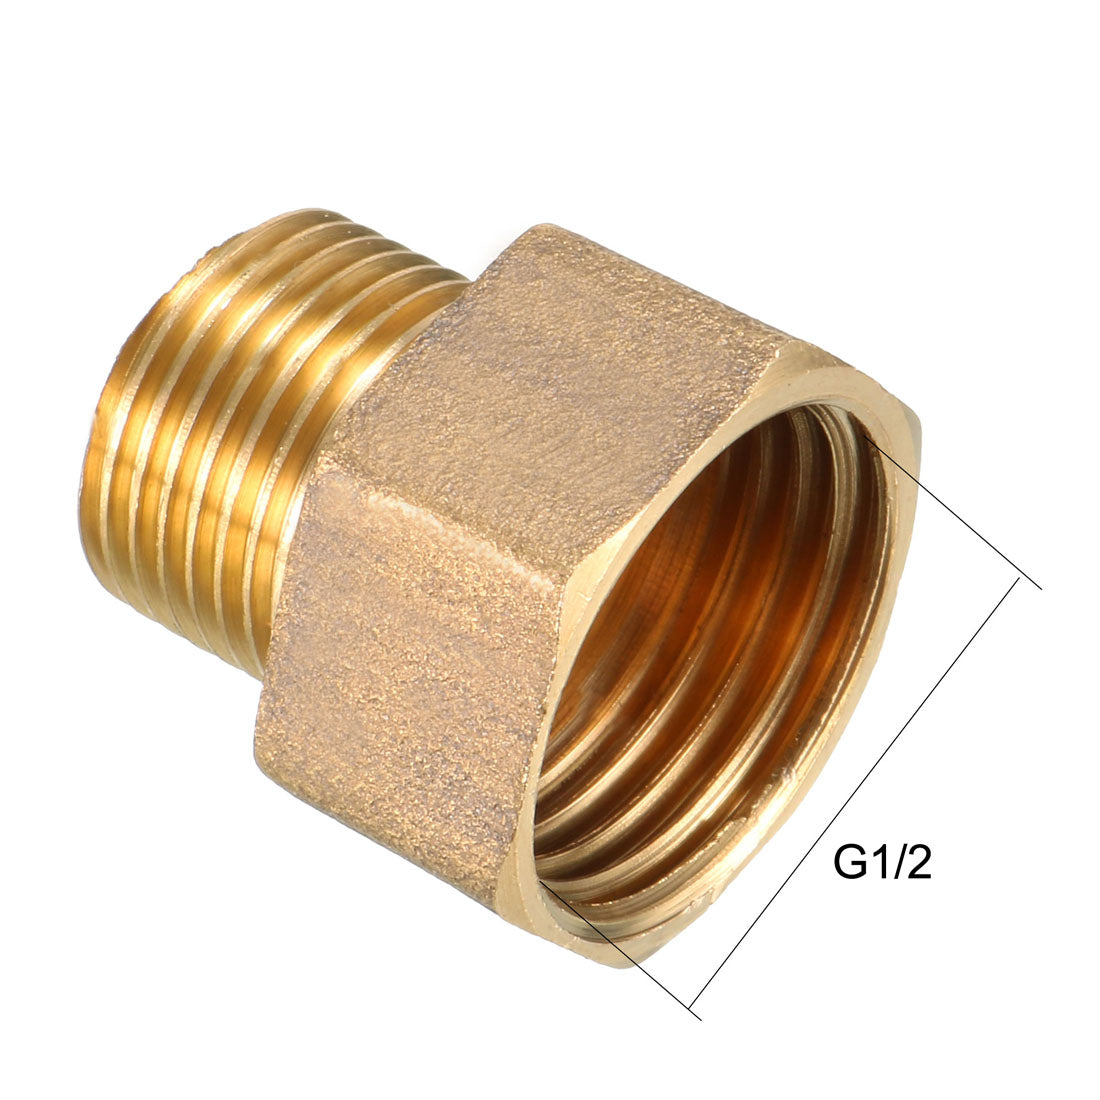 uxcell Uxcell Brass Threaded Pipe Fitting G3/8 Male x G1/2 Female Coupling 3pcs